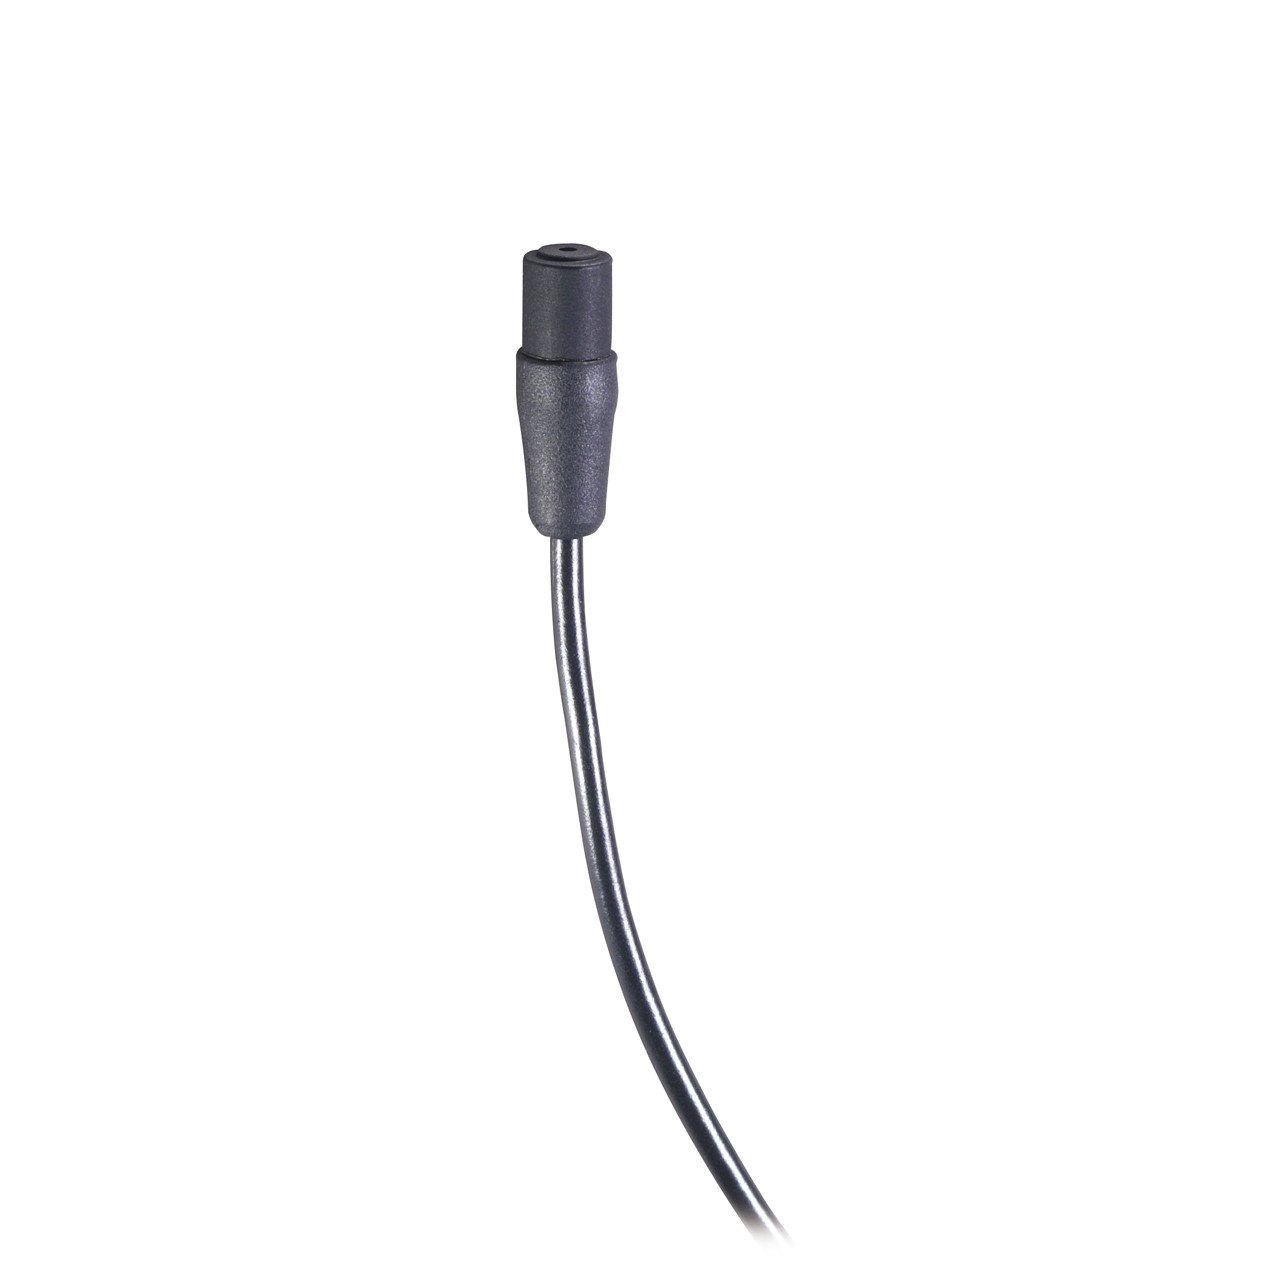 Lapel Microphones - Audio-Technica AT899cW Subminiature Omnidirectional Lavalier Microphone